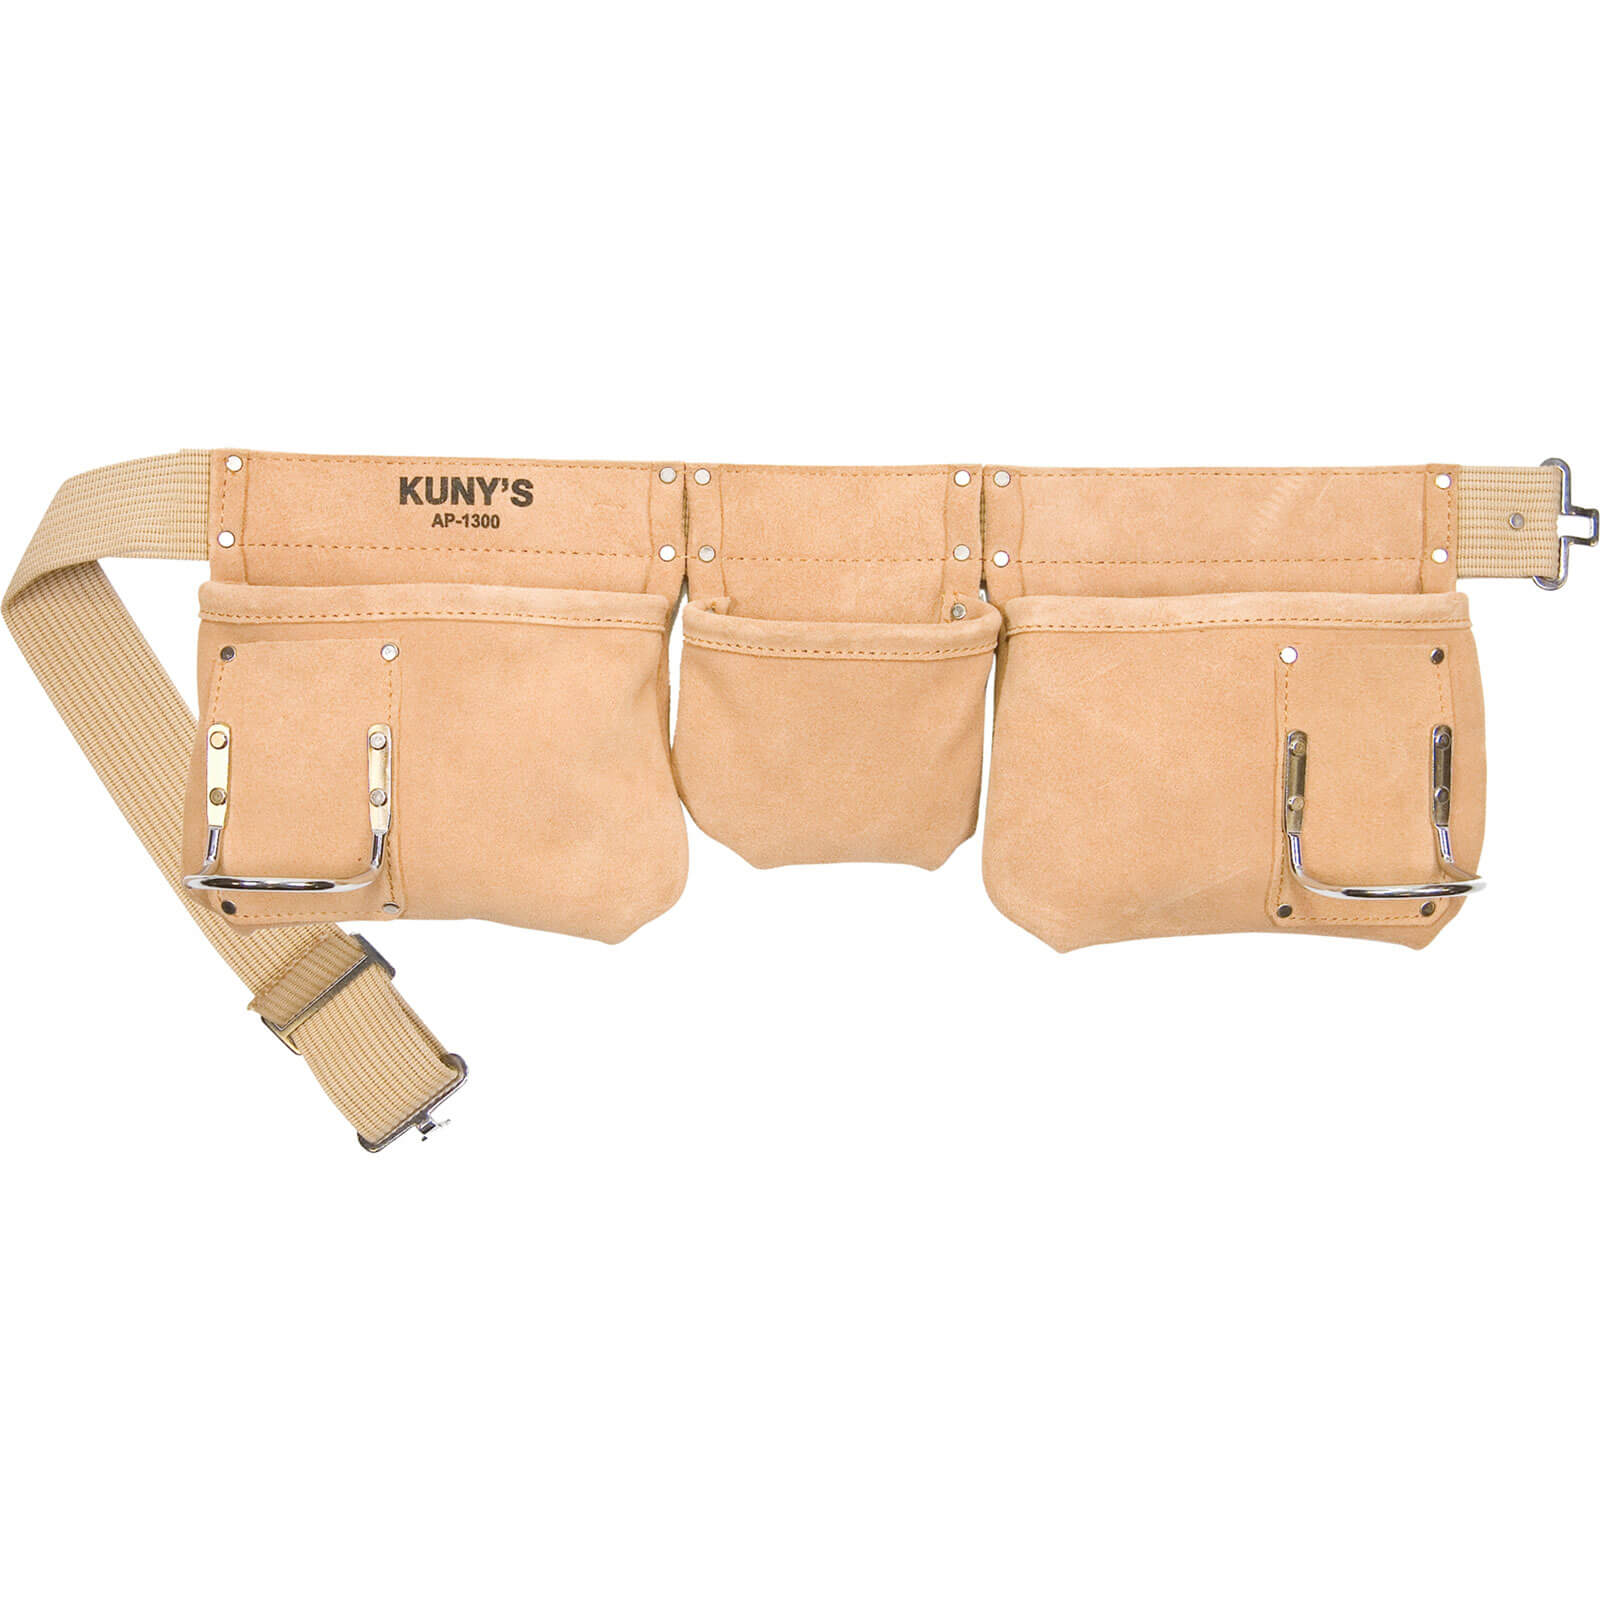 Image of Kunys Carpenters Tool Apron Pouch